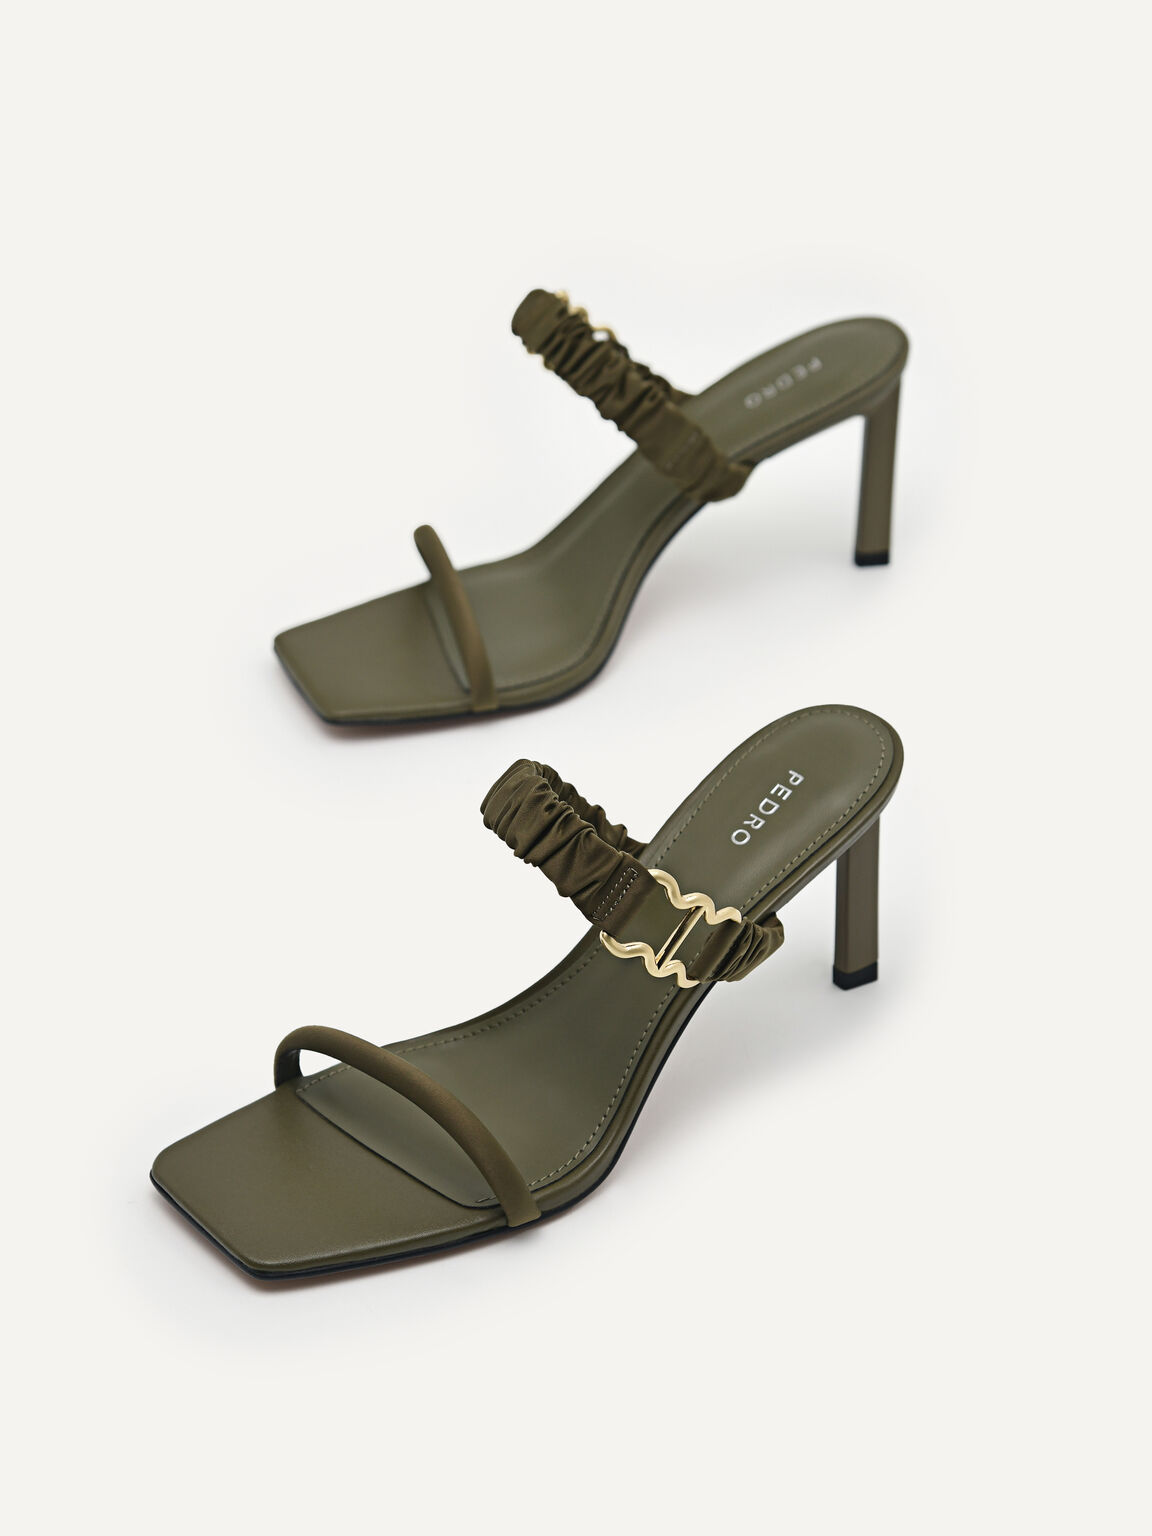 Double Strap Heeled Sandals, Military Green